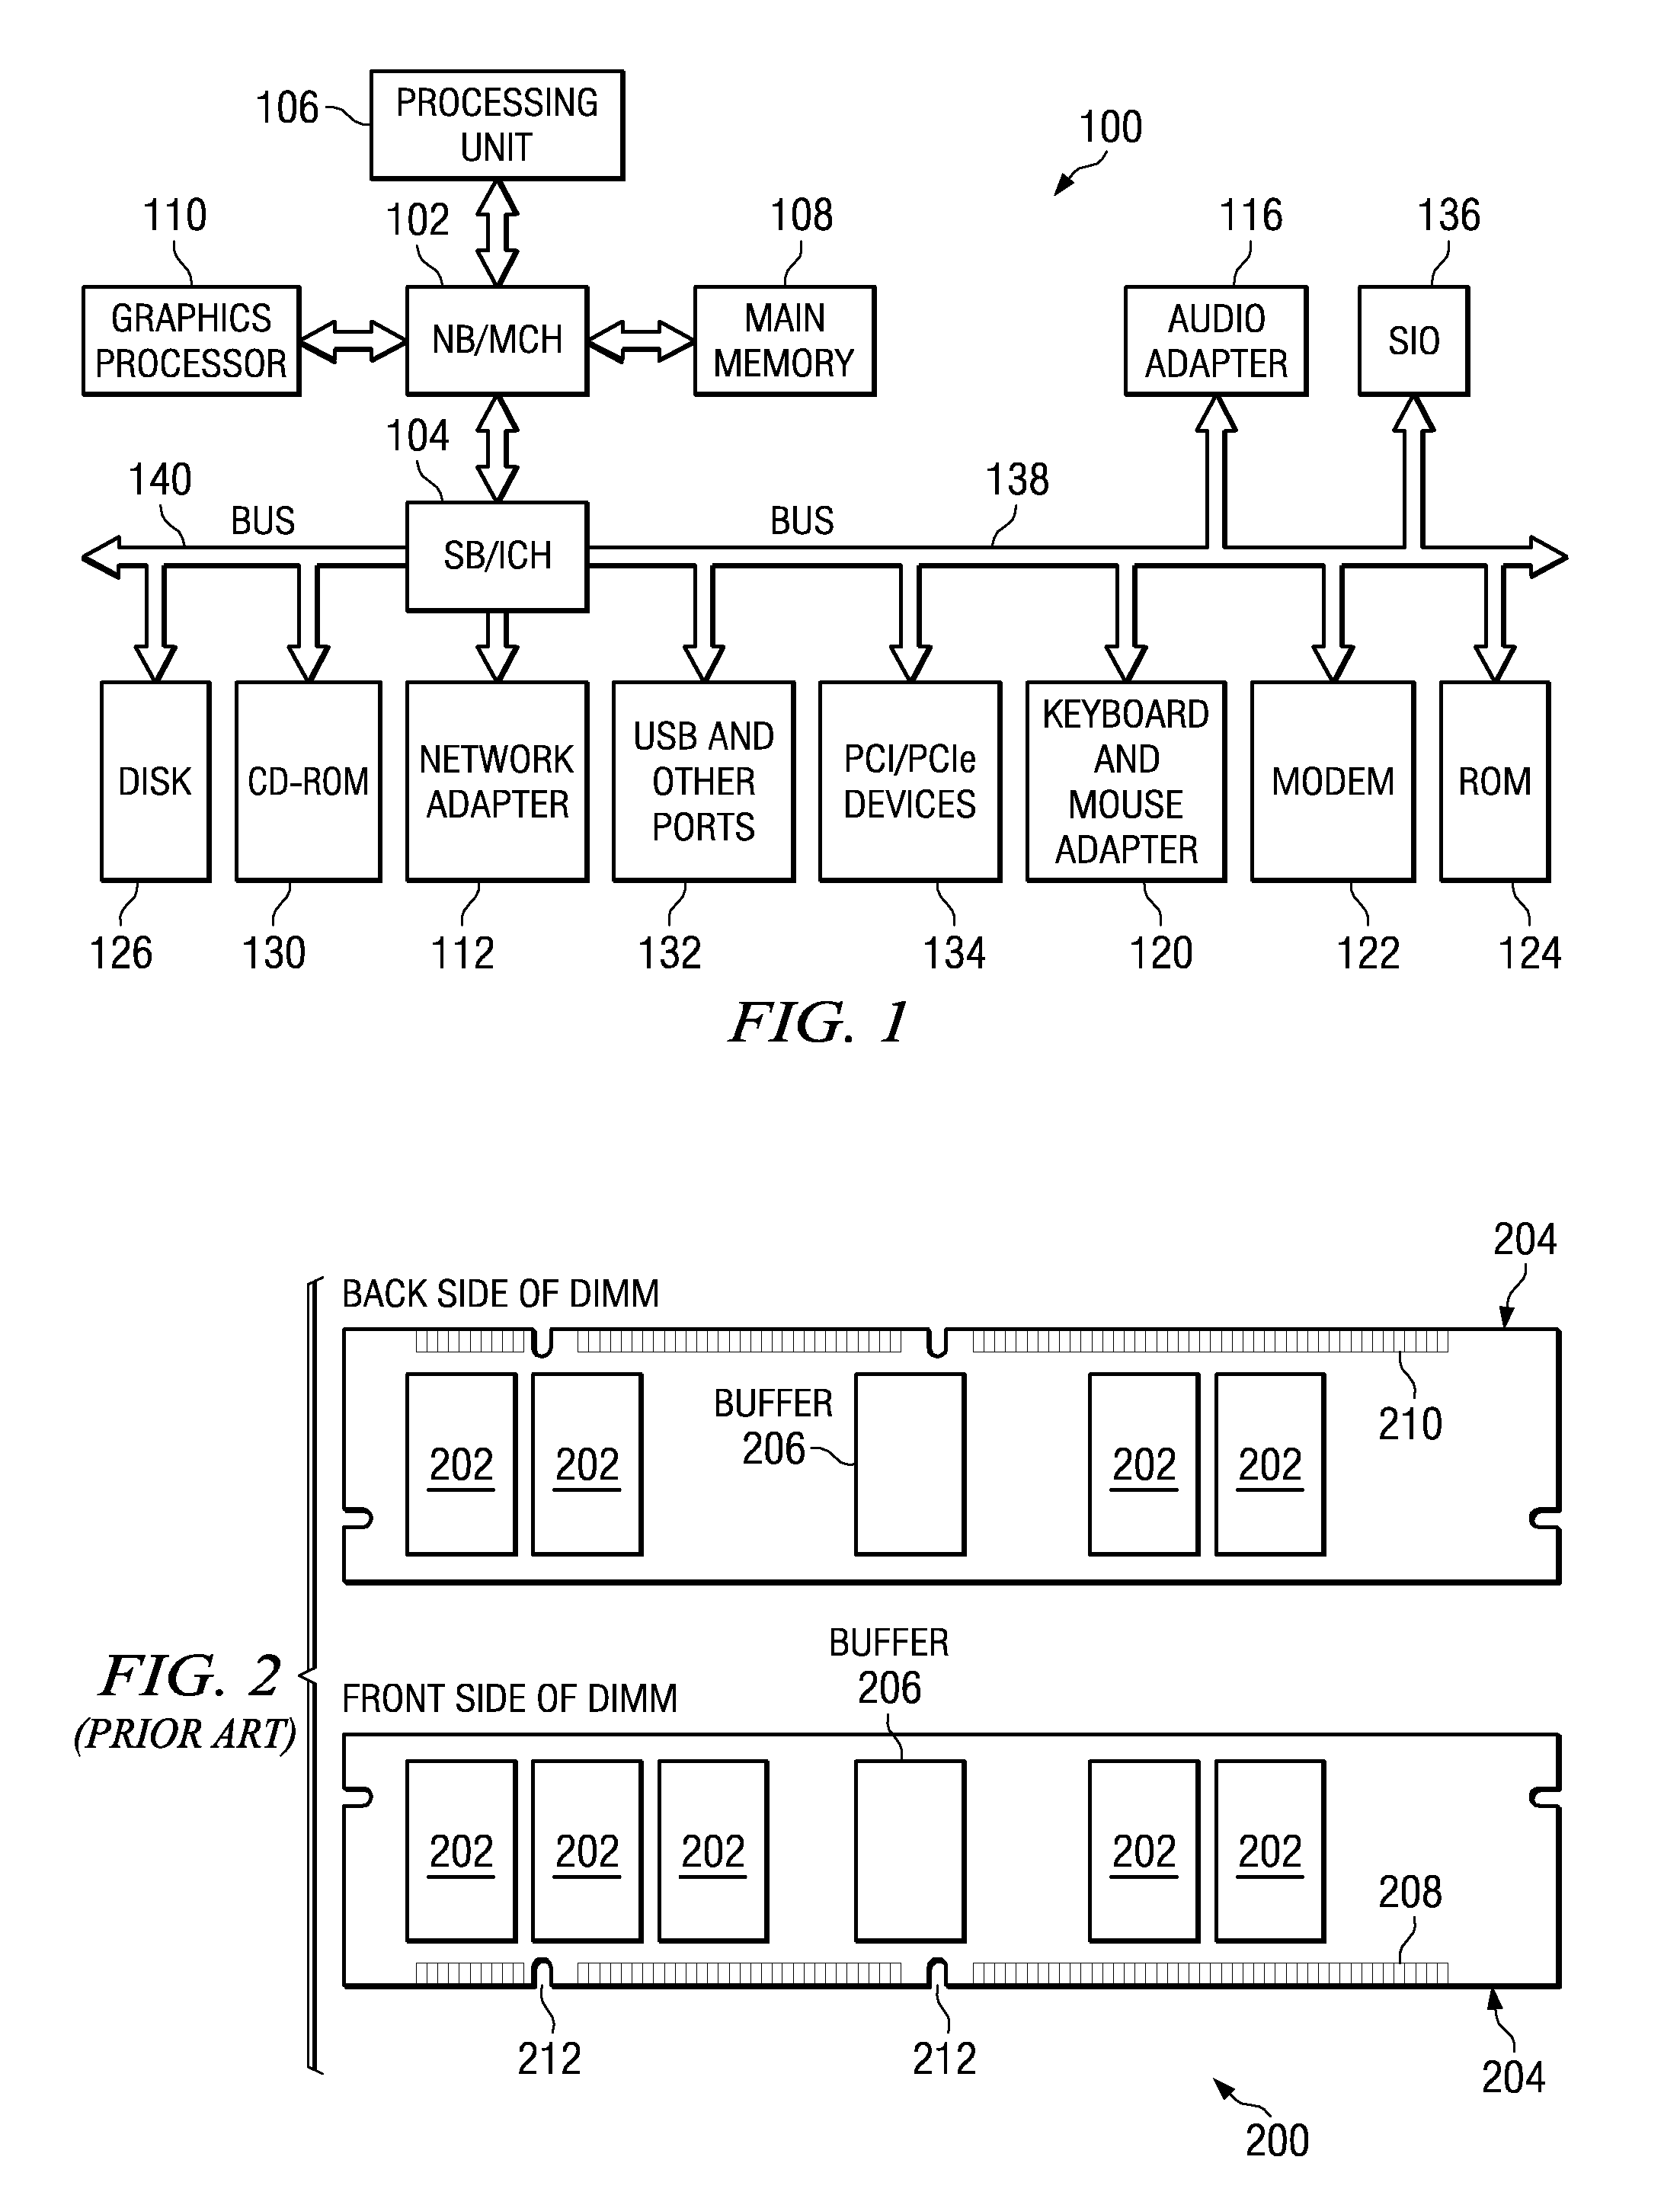 Performing error correction at a memory device level that is transparent to a memory channel